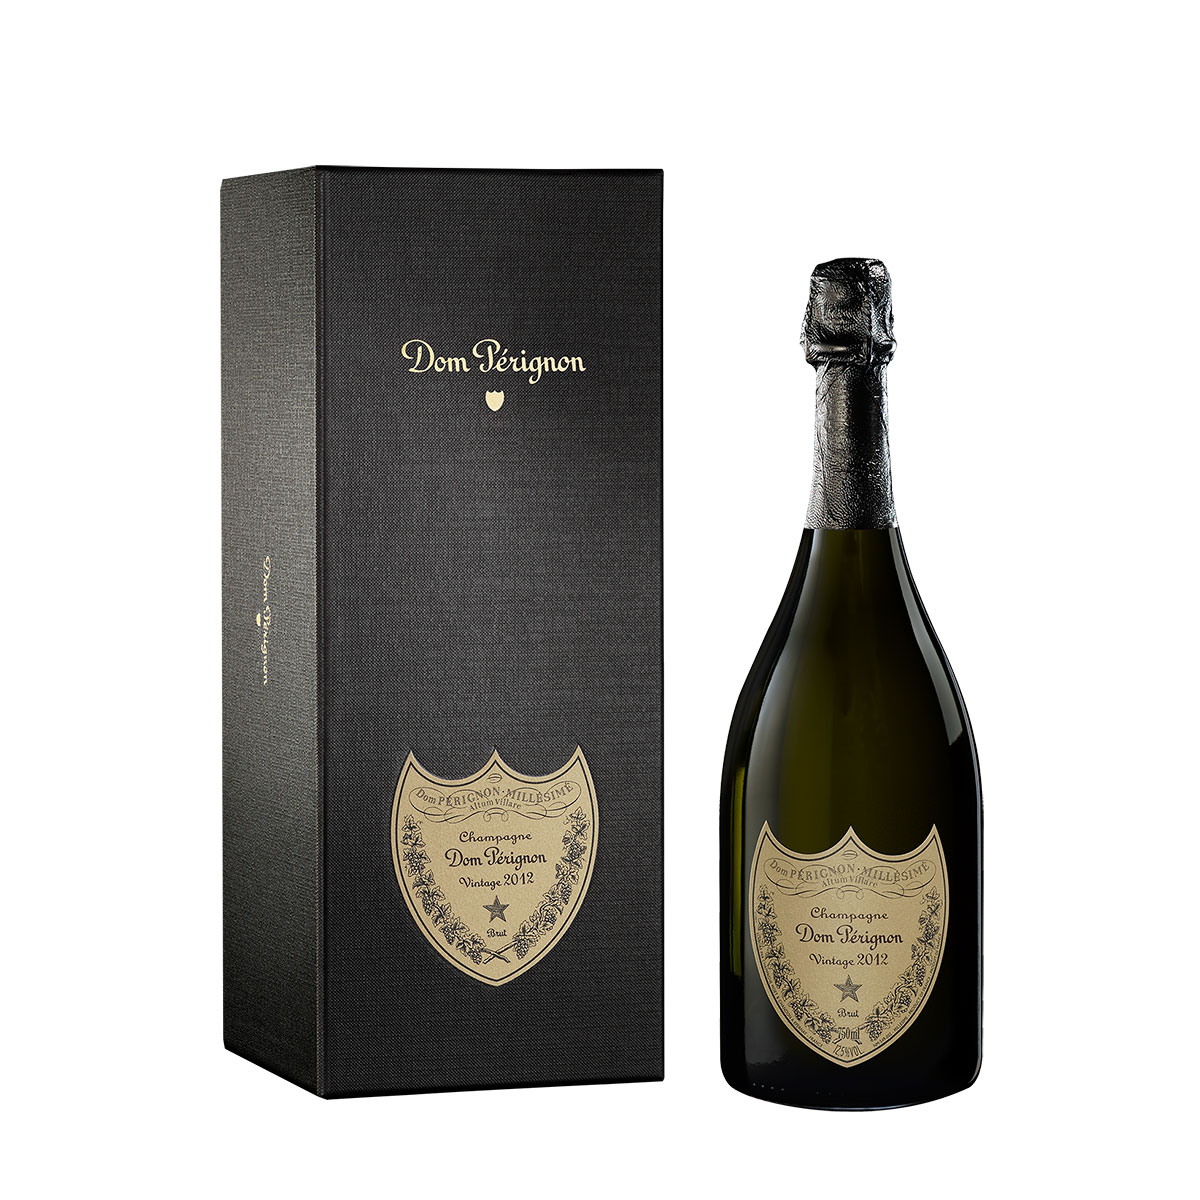 La Vie en Rose & Dom Perignon - Delivery in Germany by GiftsForEurope